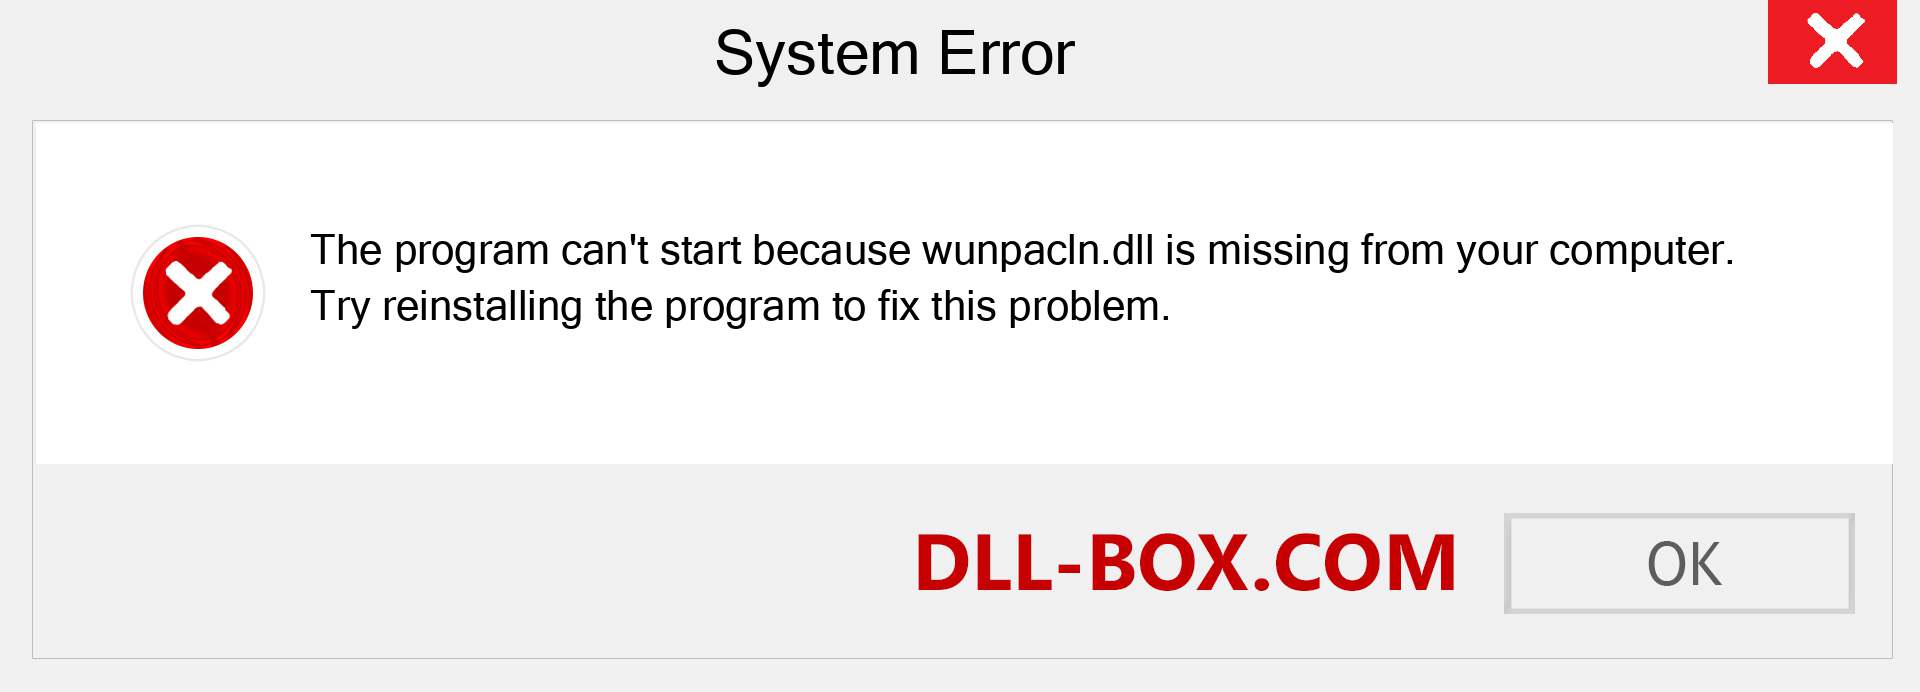  wunpacln.dll file is missing?. Download for Windows 7, 8, 10 - Fix  wunpacln dll Missing Error on Windows, photos, images